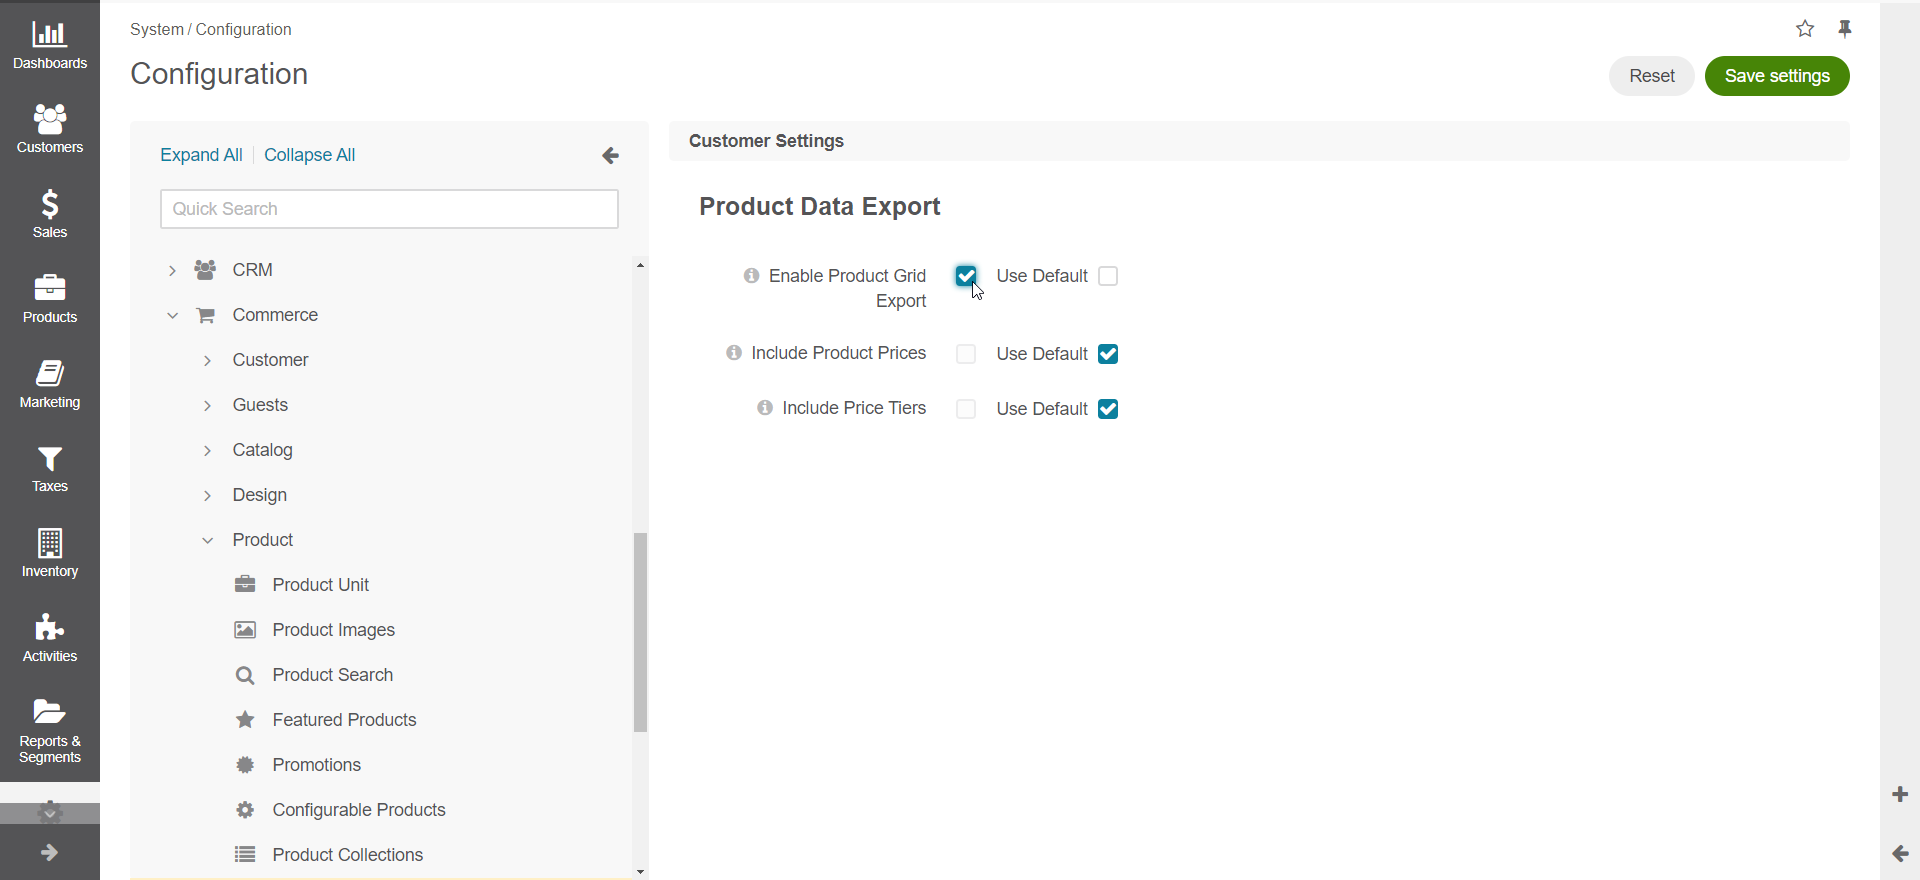 Product data export configuration options on global level